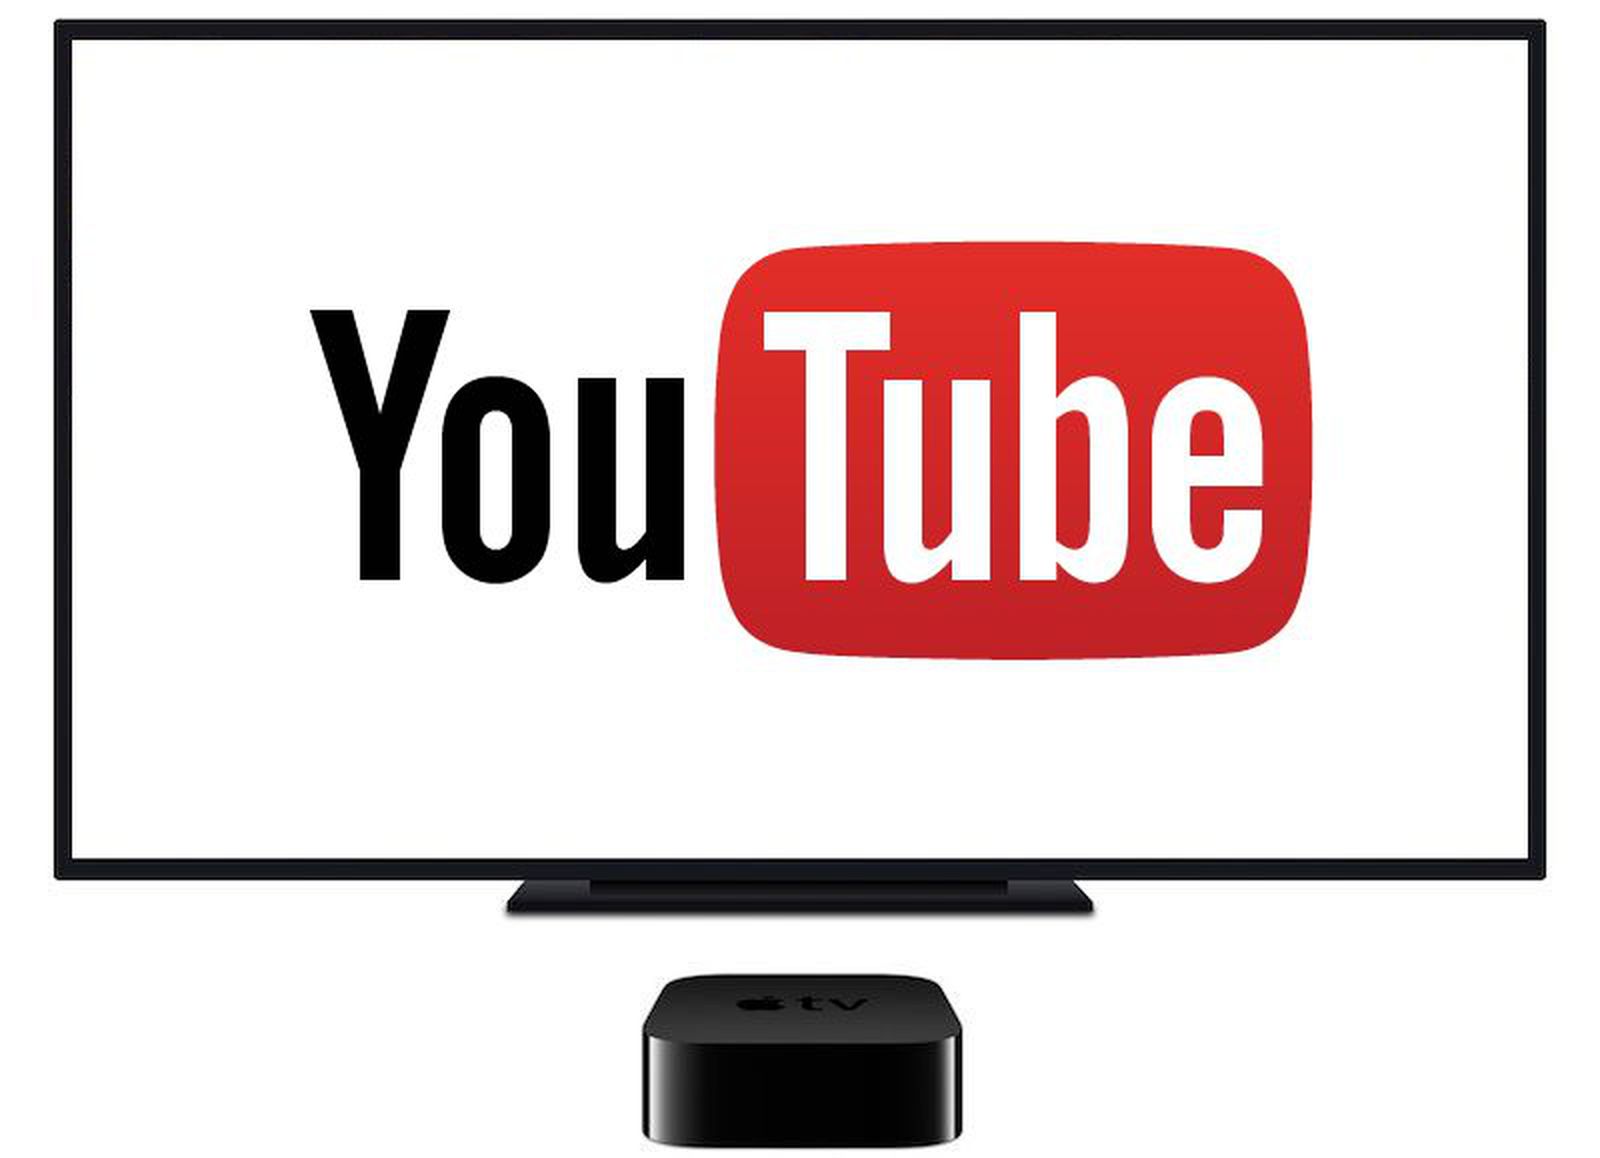 YouTube discontinuing the Apple TV 3rd generation app, AirPlay still available